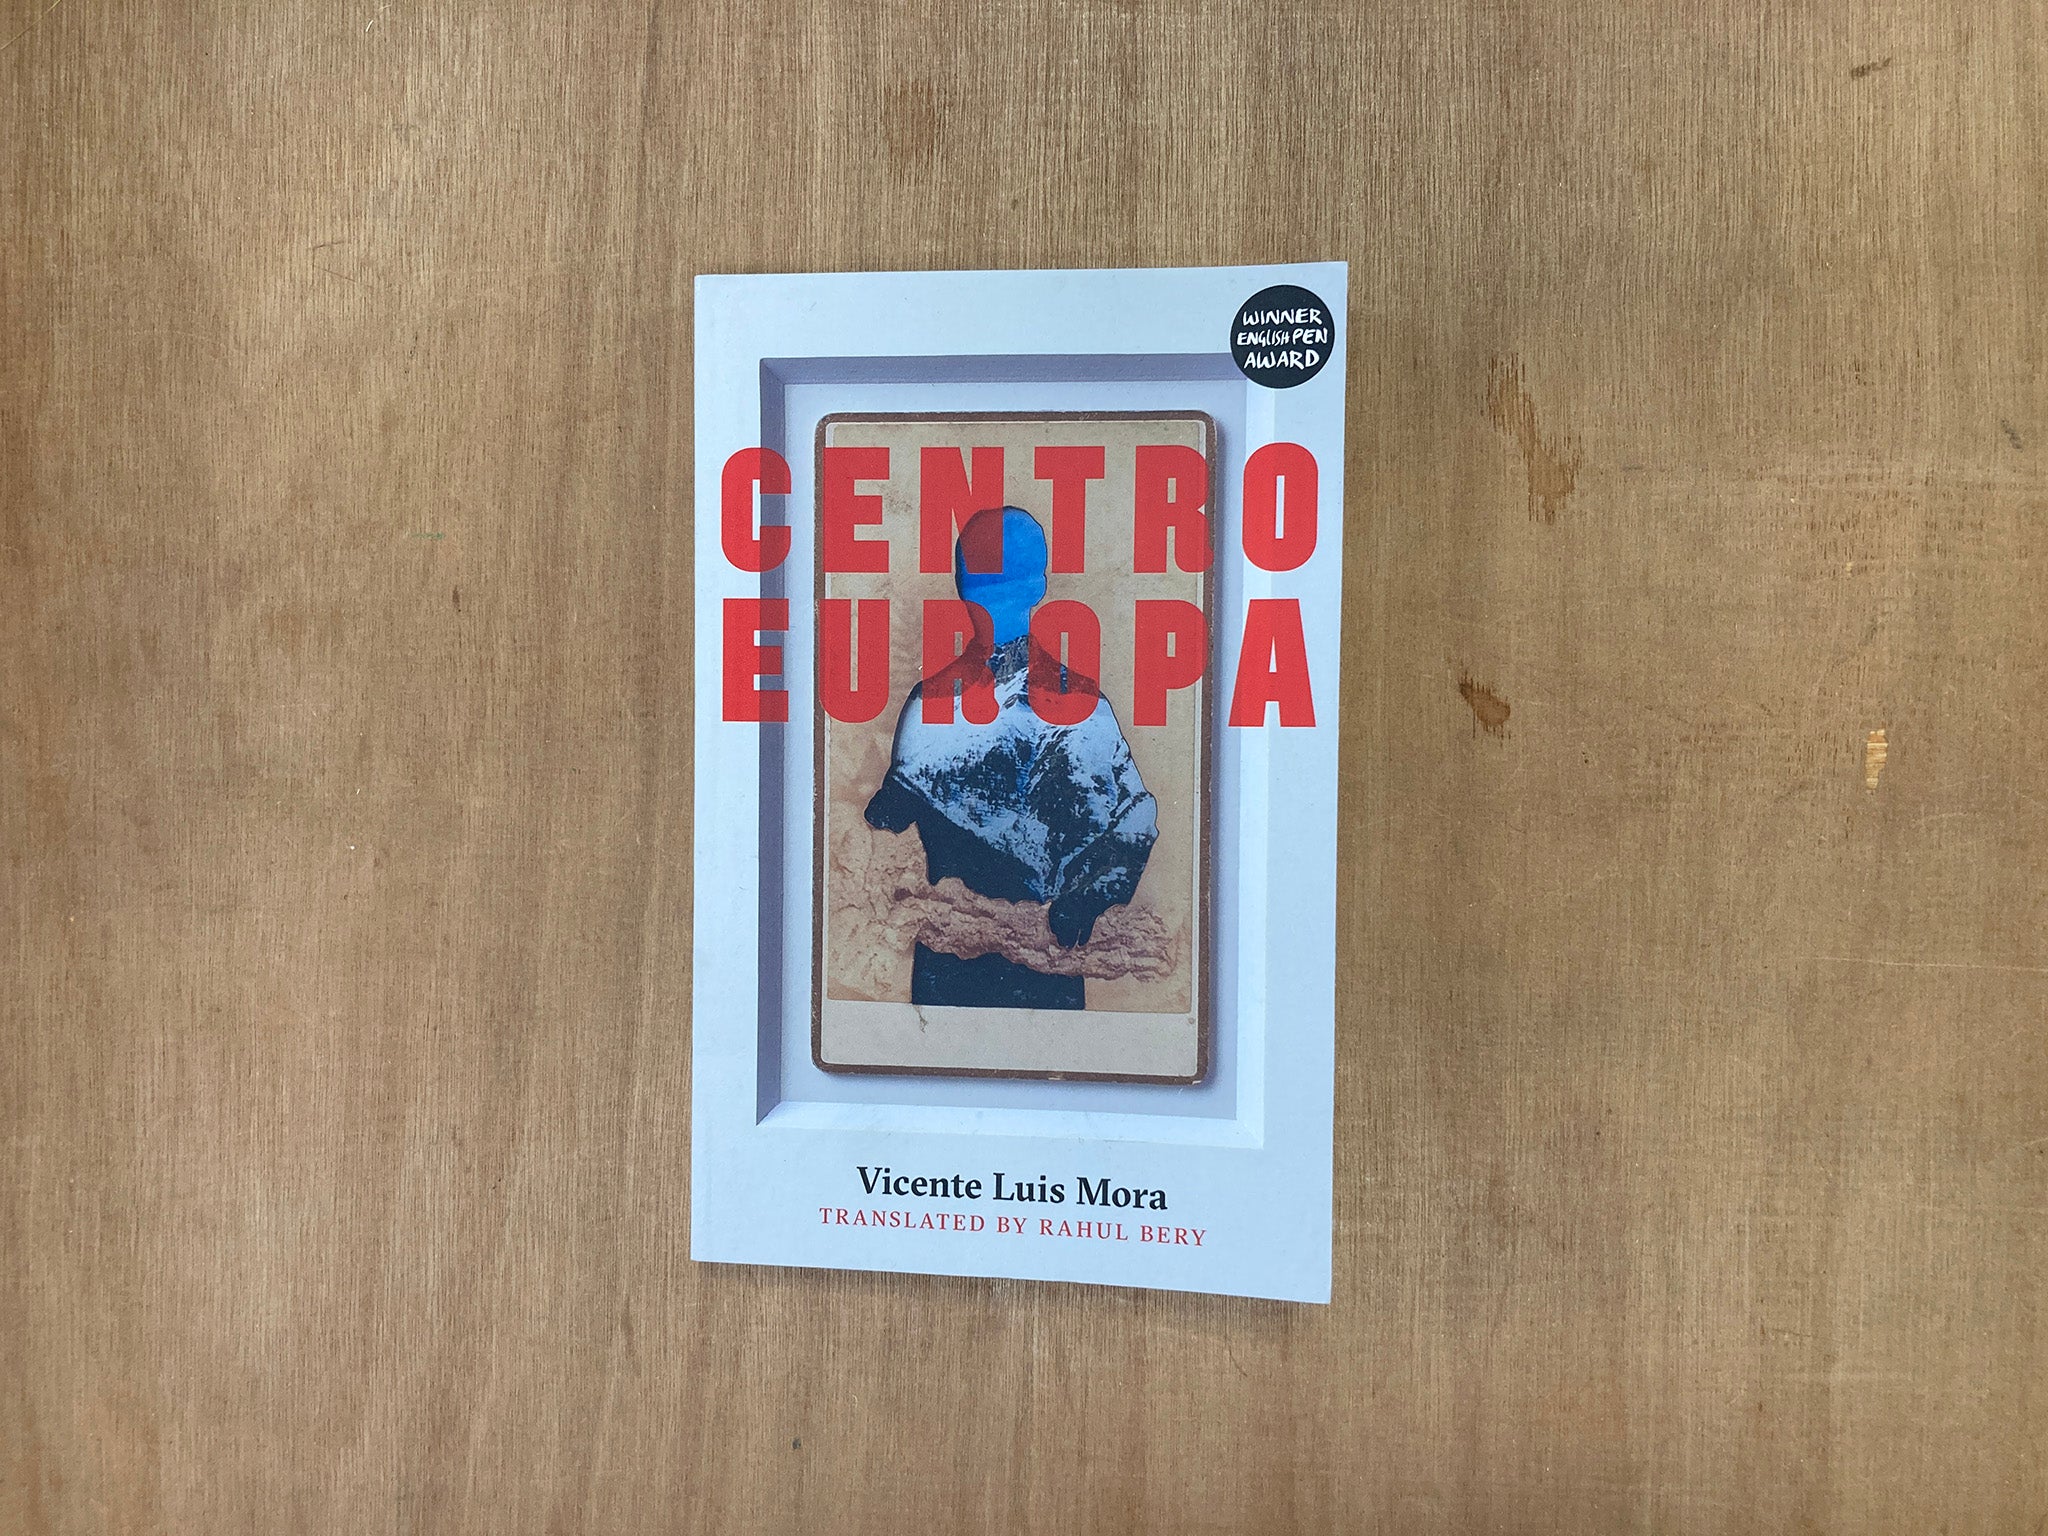 CENTROEUROPA by Vicente Luis Mora, translated by Rahul Bery